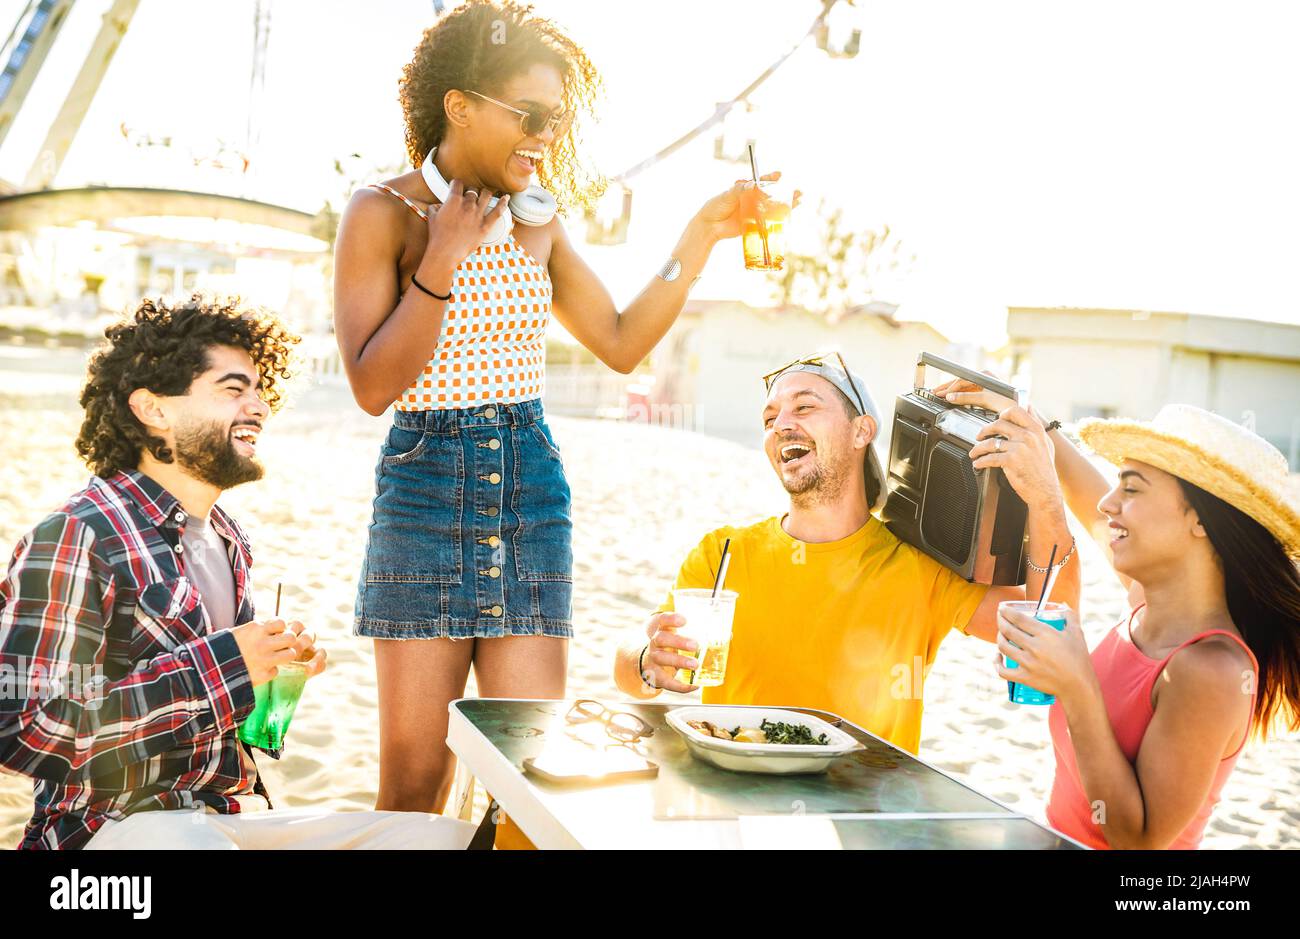 Happy men and women at sunset on vacation days - Summer life style concept with friends having fun together drinking at spring break beach festival Stock Photo